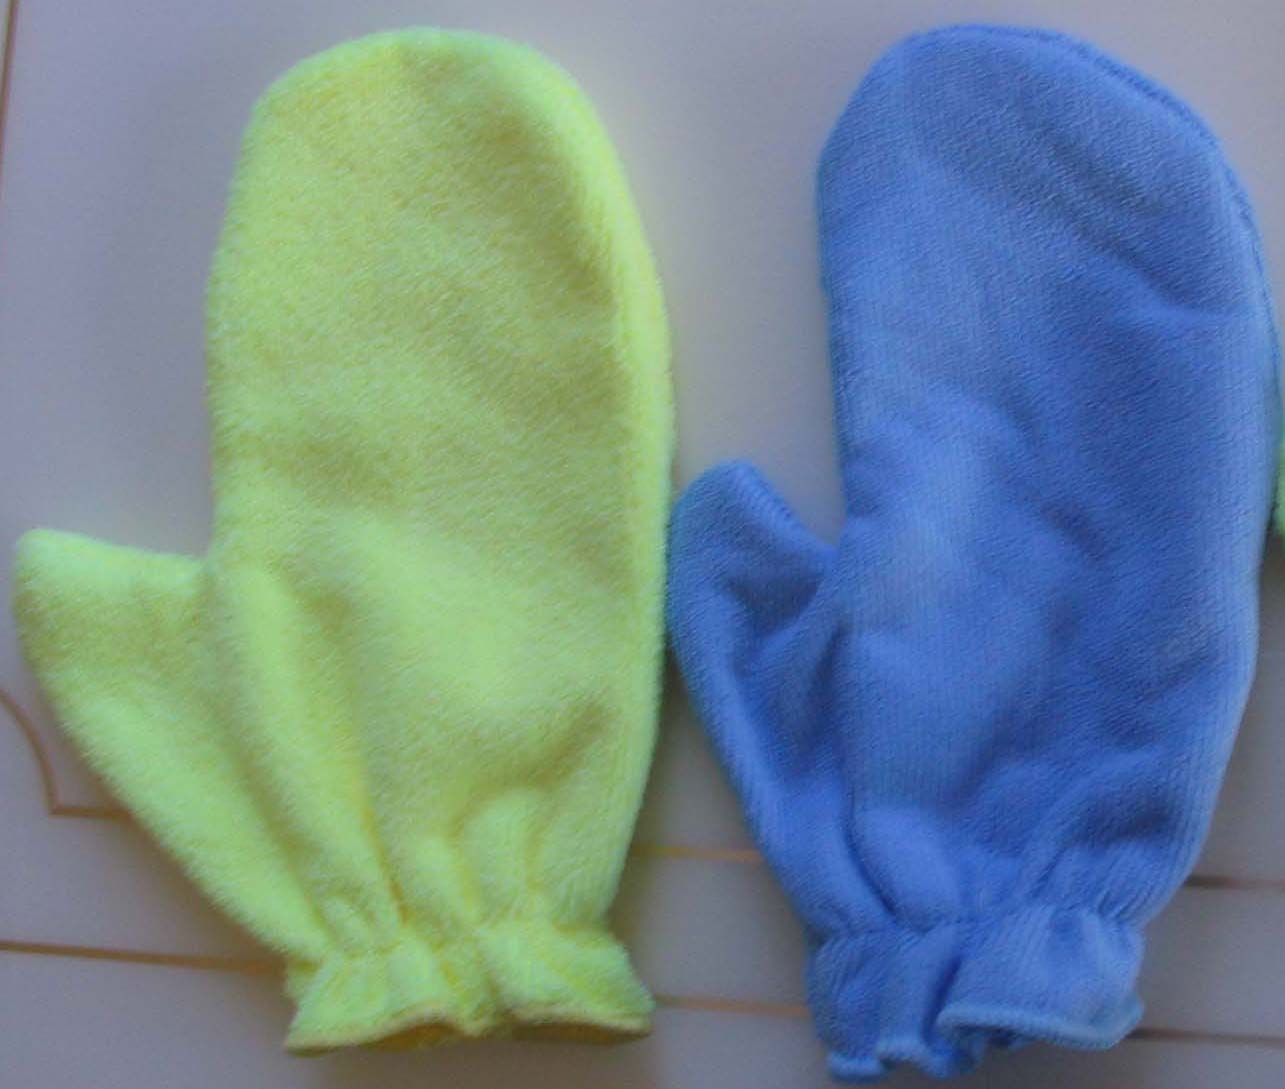  Cleaning Glove (Nettoyage Glove)